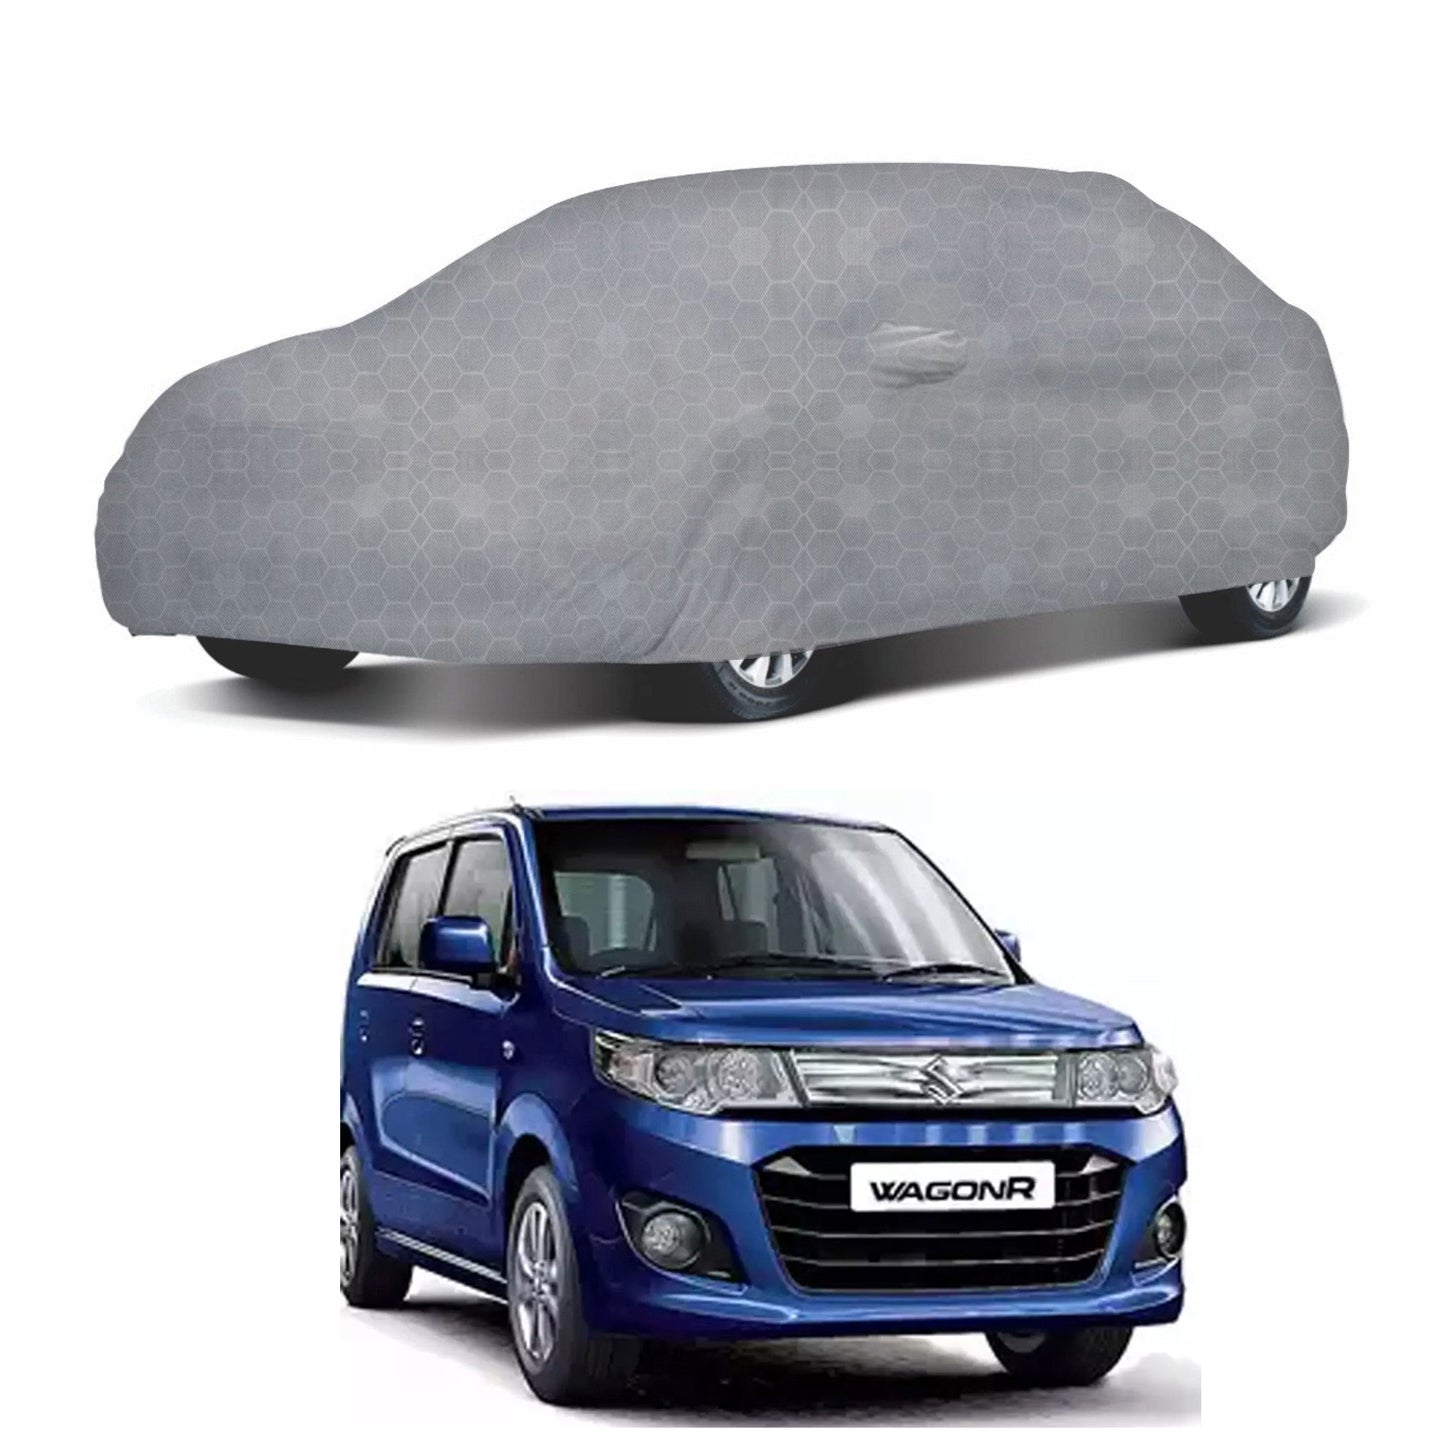 Oshotto 100% Dust Proof, Water Resistant Grey Car Body Cover with Mirror Pocket For Maruti Suzuki WagonR 2010-2018